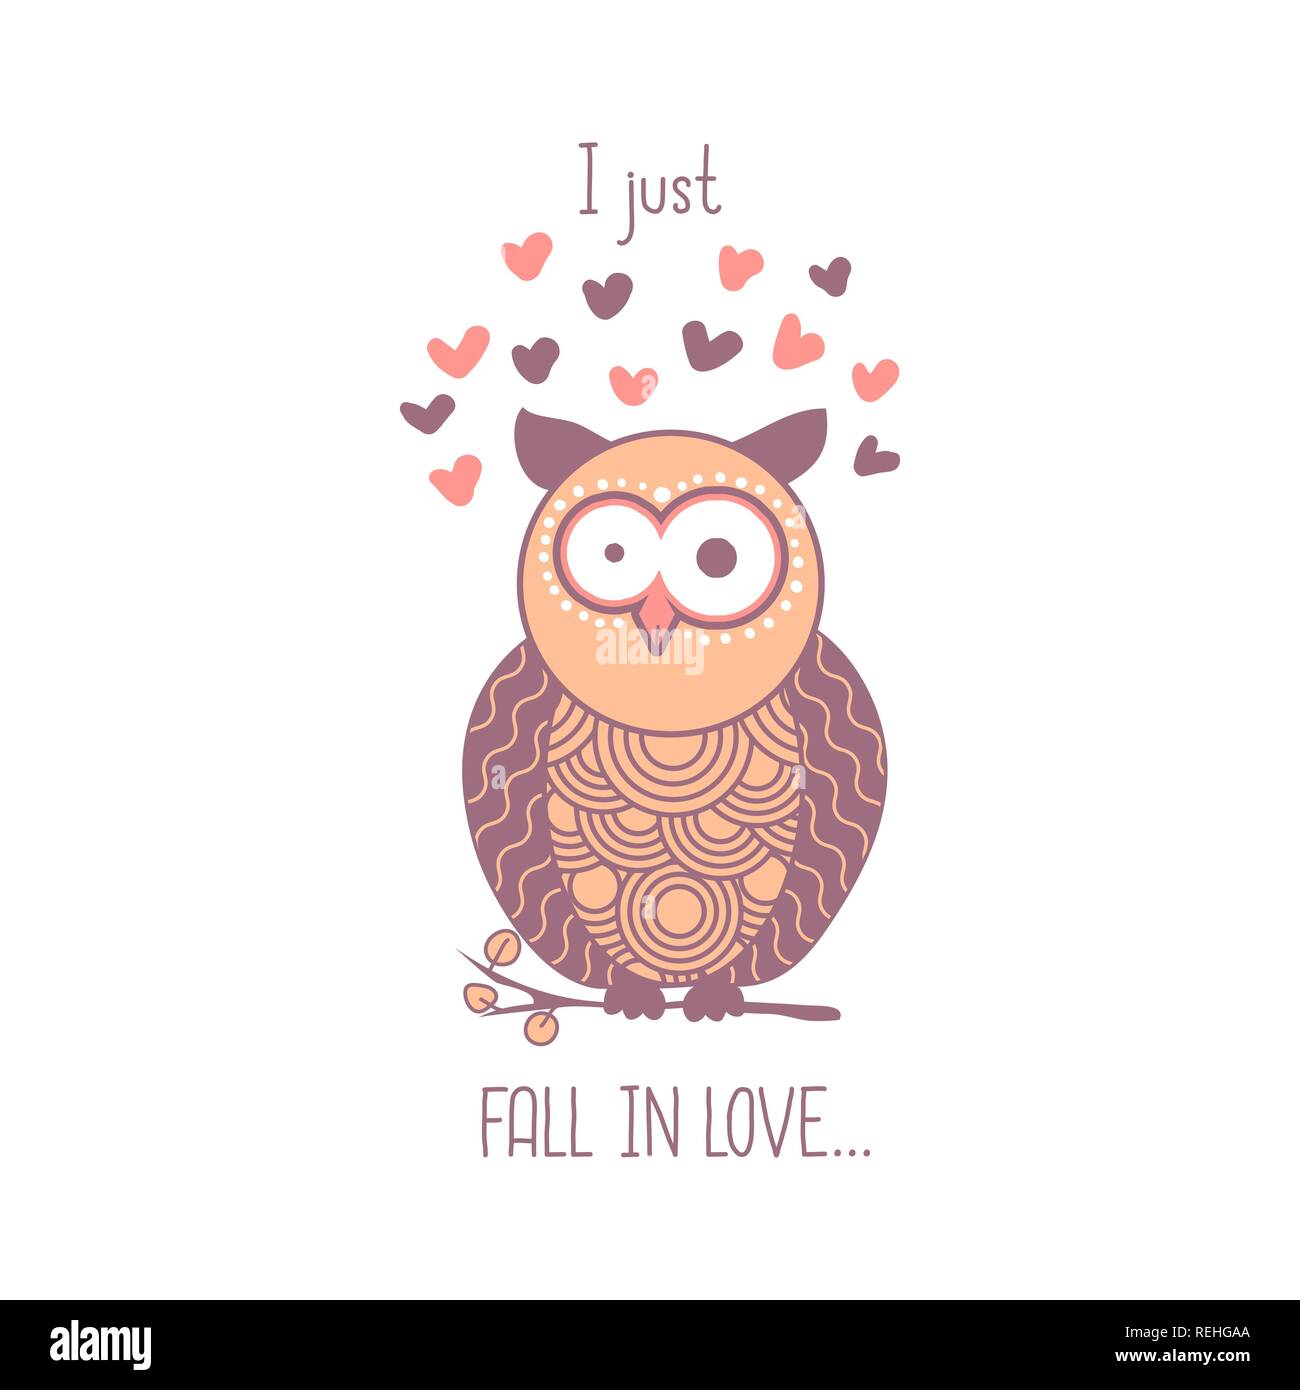 I just fall in love. Cute pink shocked cartoon owl with hearts. Isolated element for greeting card design for Valentines Day holiday. Vector illustration Stock Vector